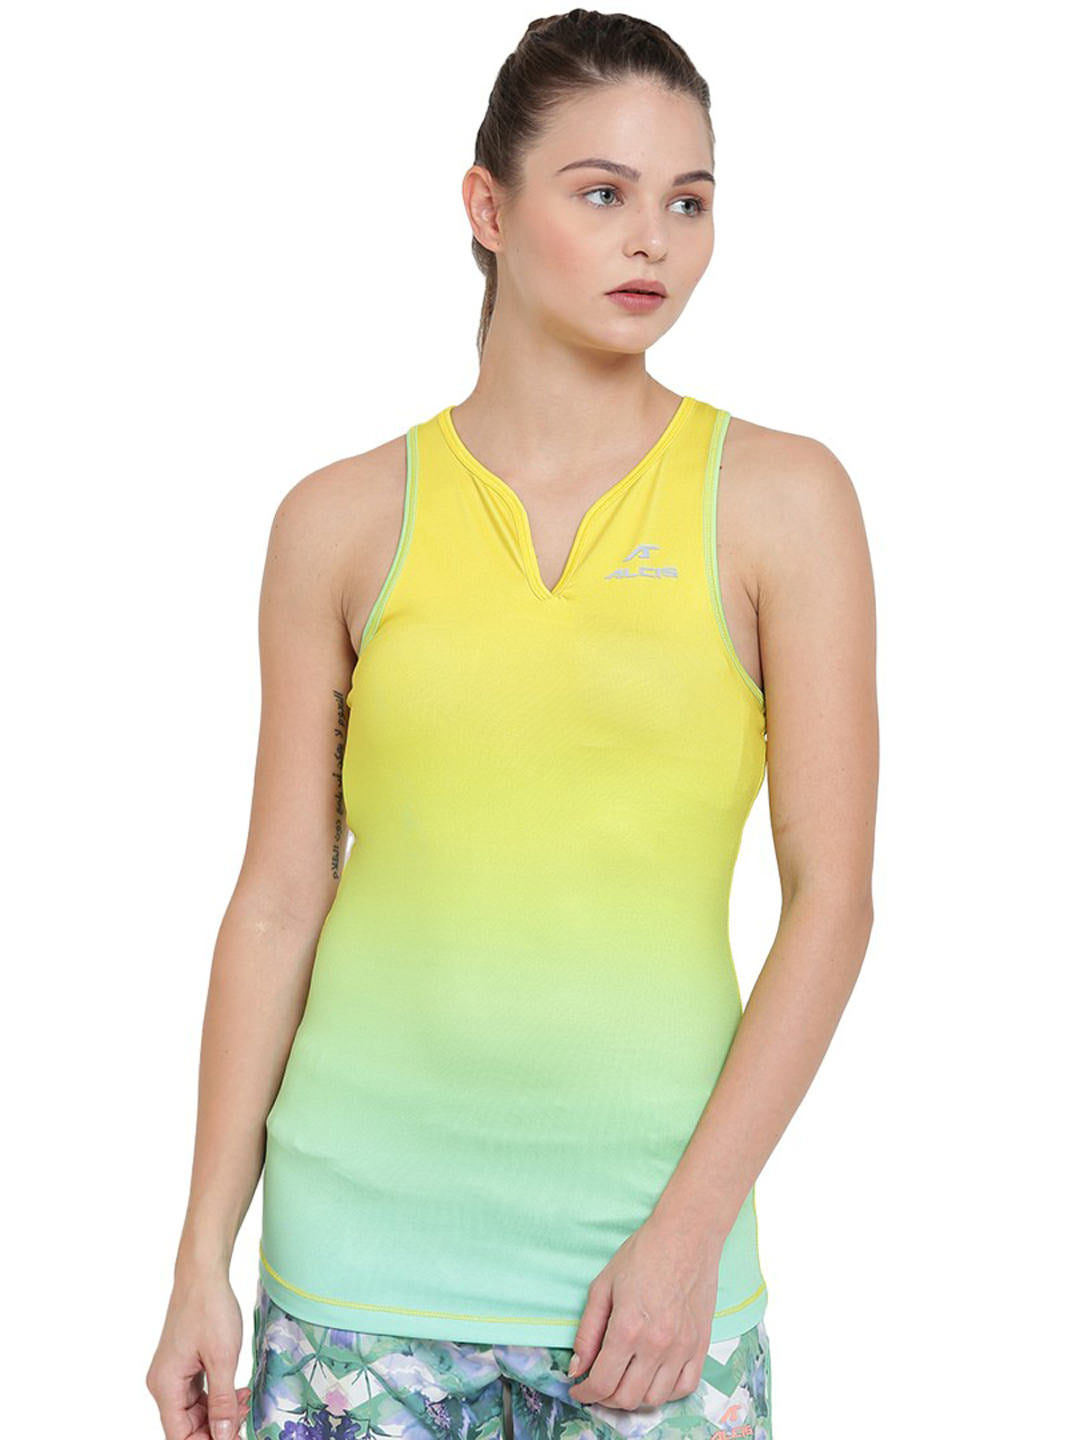 Alcis Gradition Yellow Tank Top AKRUWTO002-S